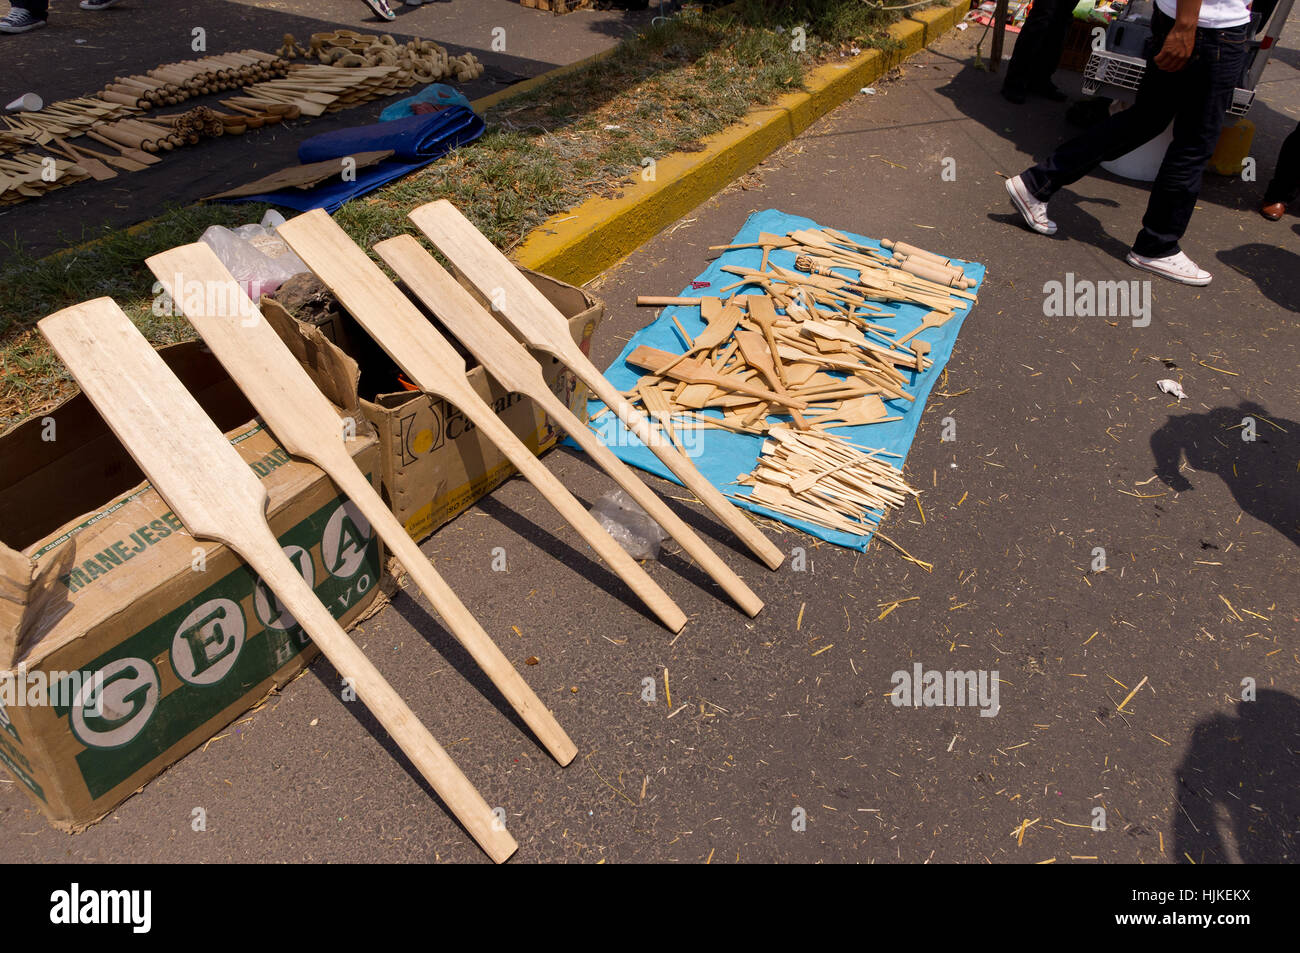 Wooden kitchen utensils sold at a Mexican market Stock Photo